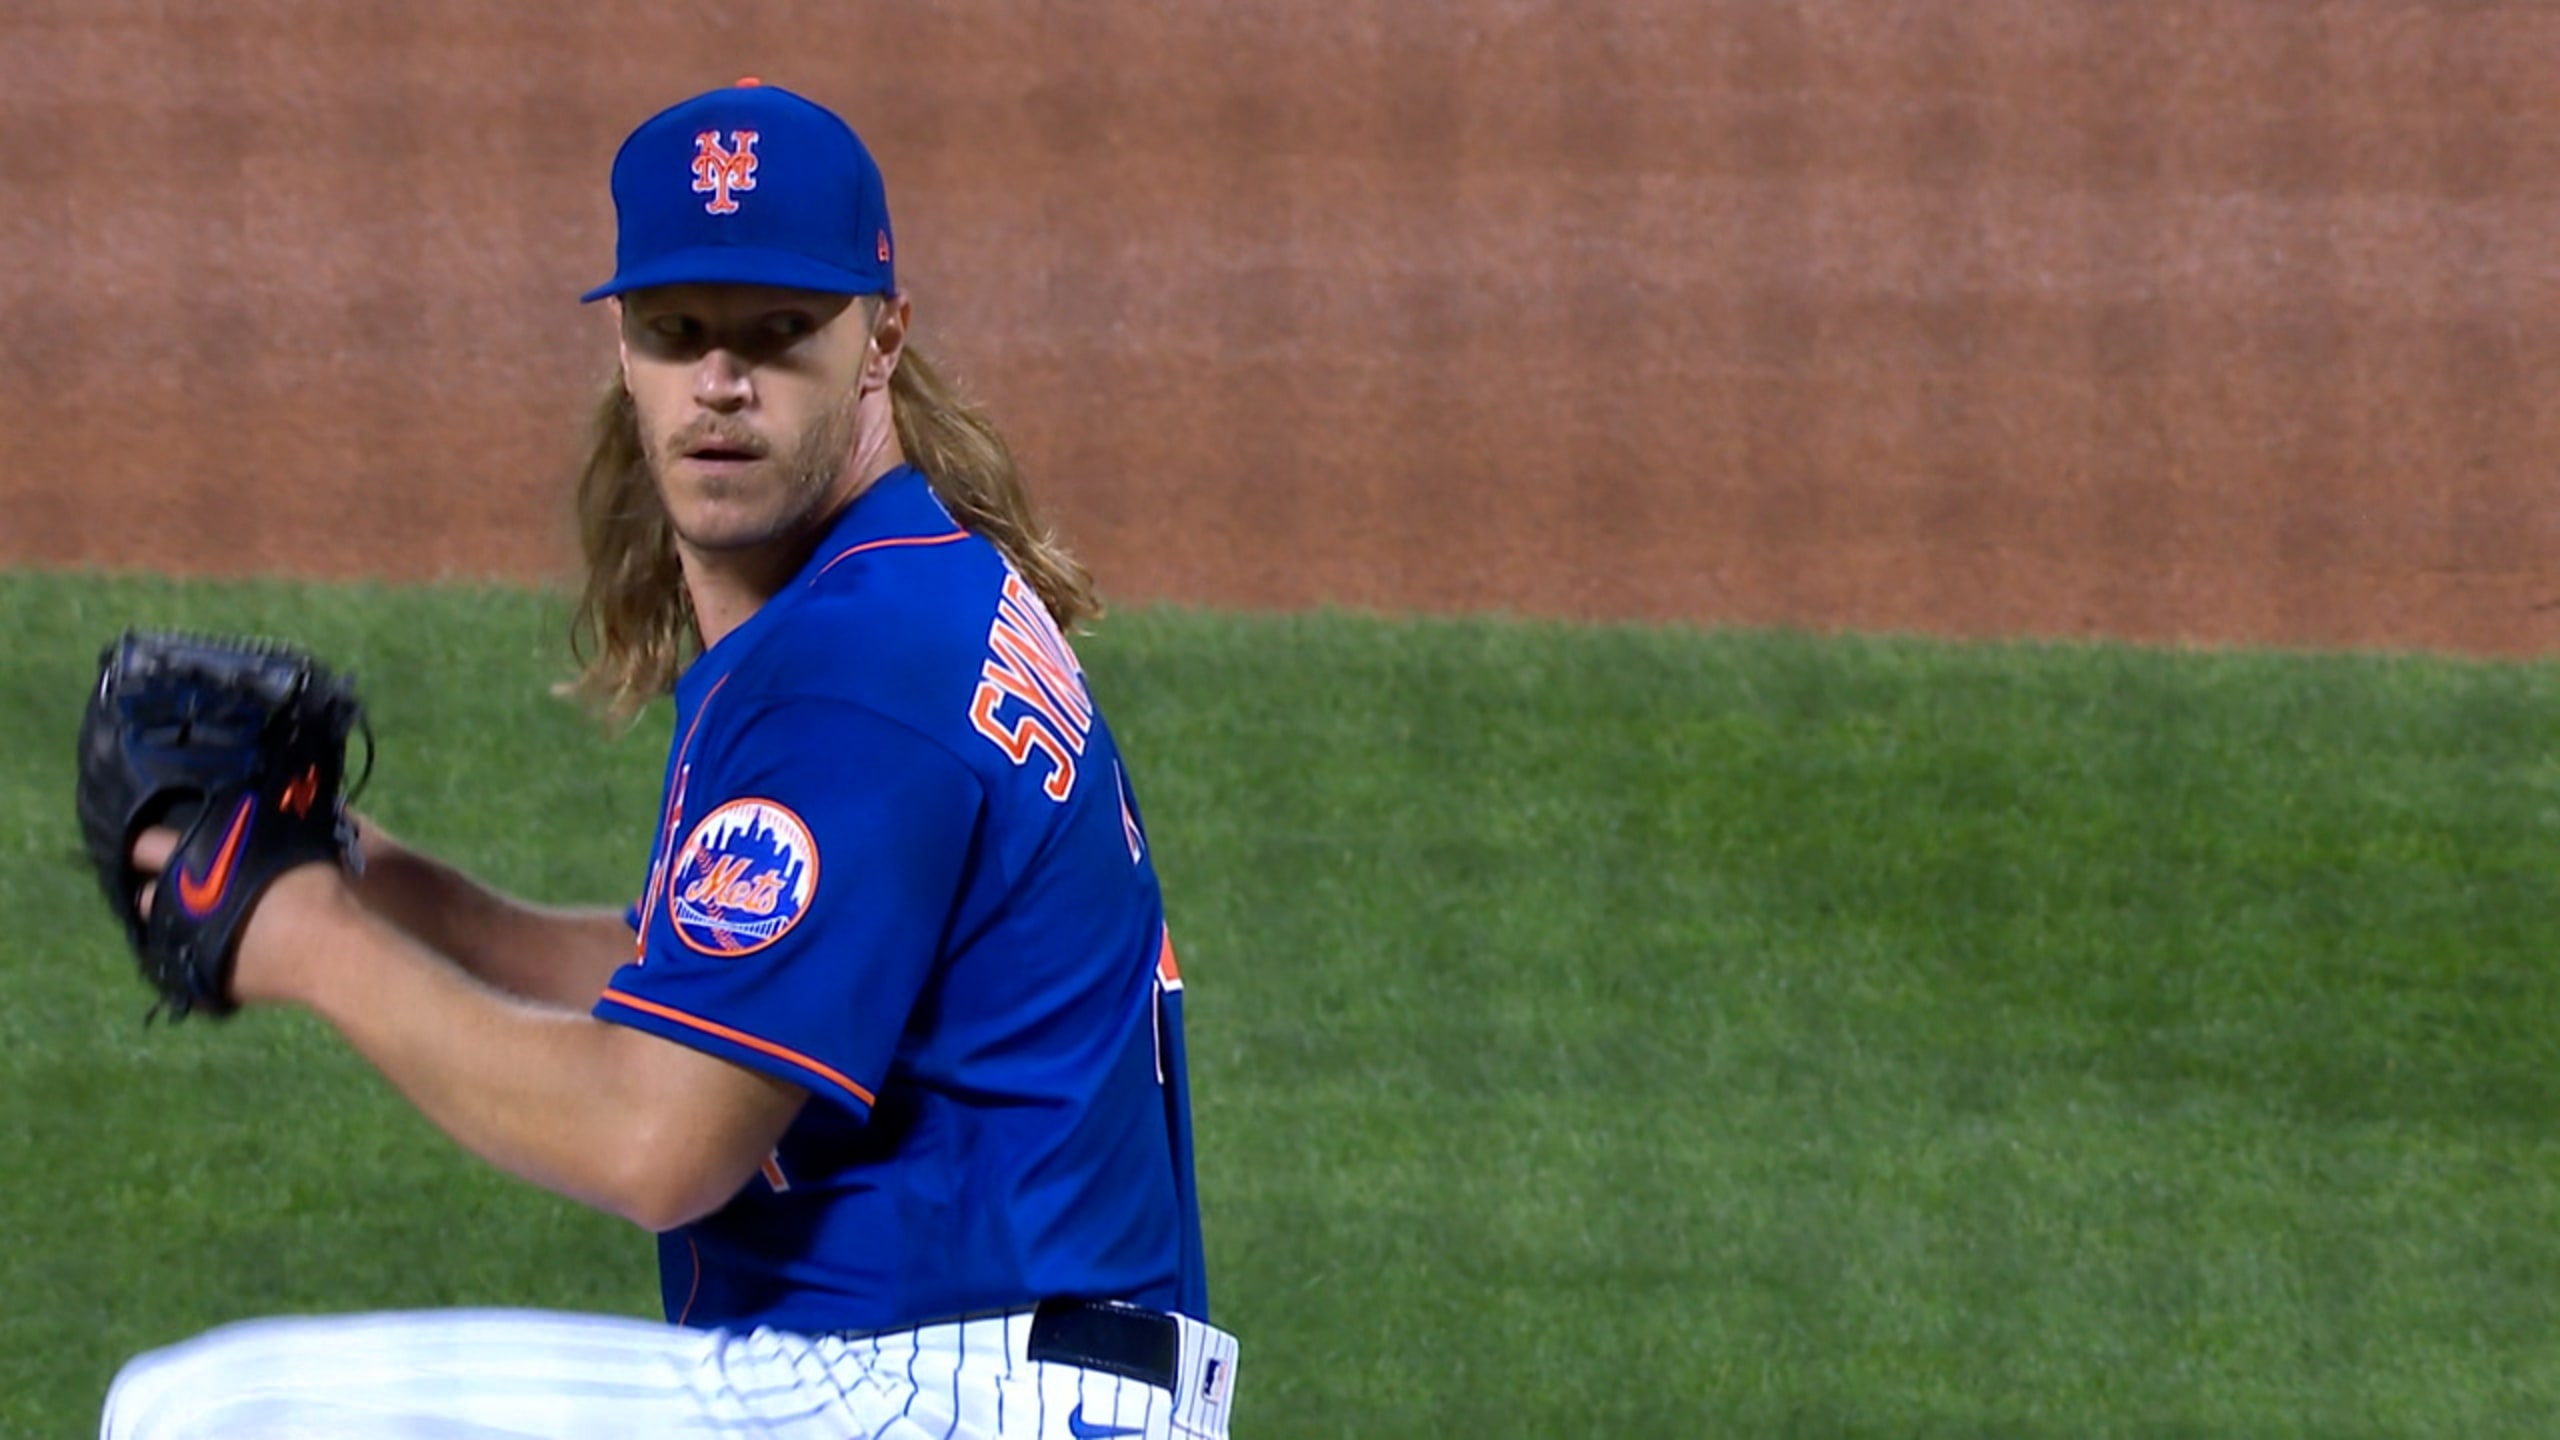 Noah Syndergaard has Tommy John surgery, expected back in 2021 - ESPN